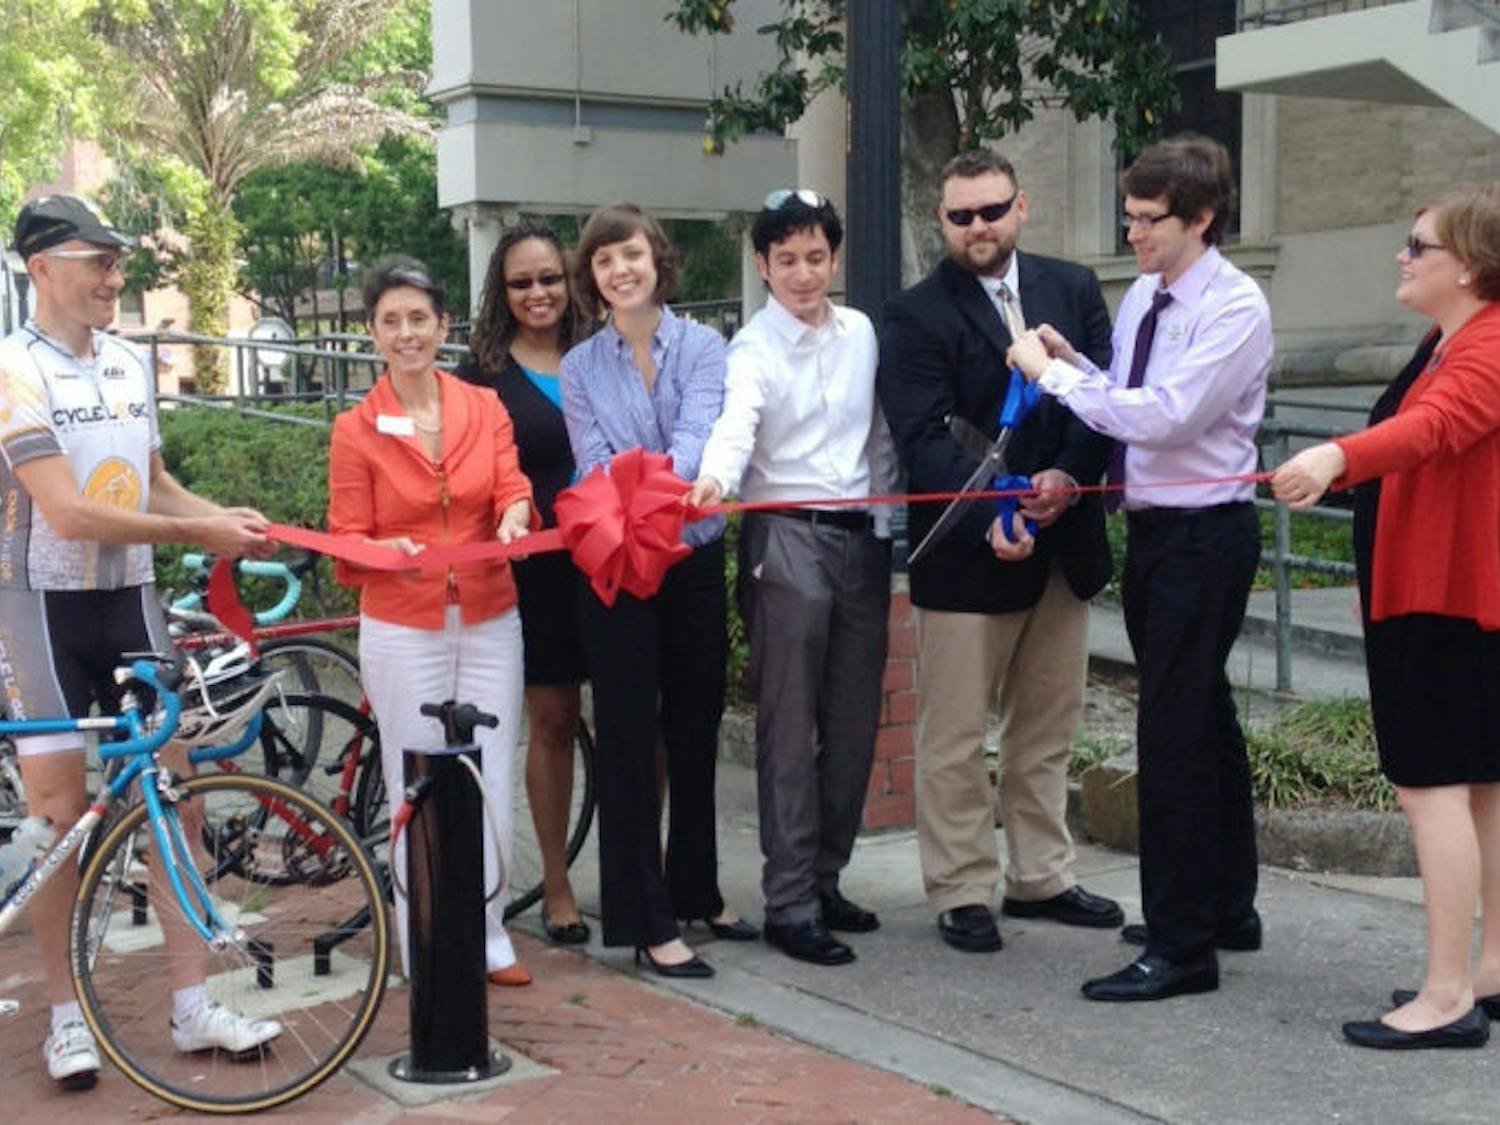 Commissioner Susan Bottcher, second from the left, and residents cut the ribbon at a “first pump” ceremony Monday morning. The event was held because the Alachua County Emerging Leaders, with the help of the City of Gainesville, installed new bike pumps downtown.&nbsp;